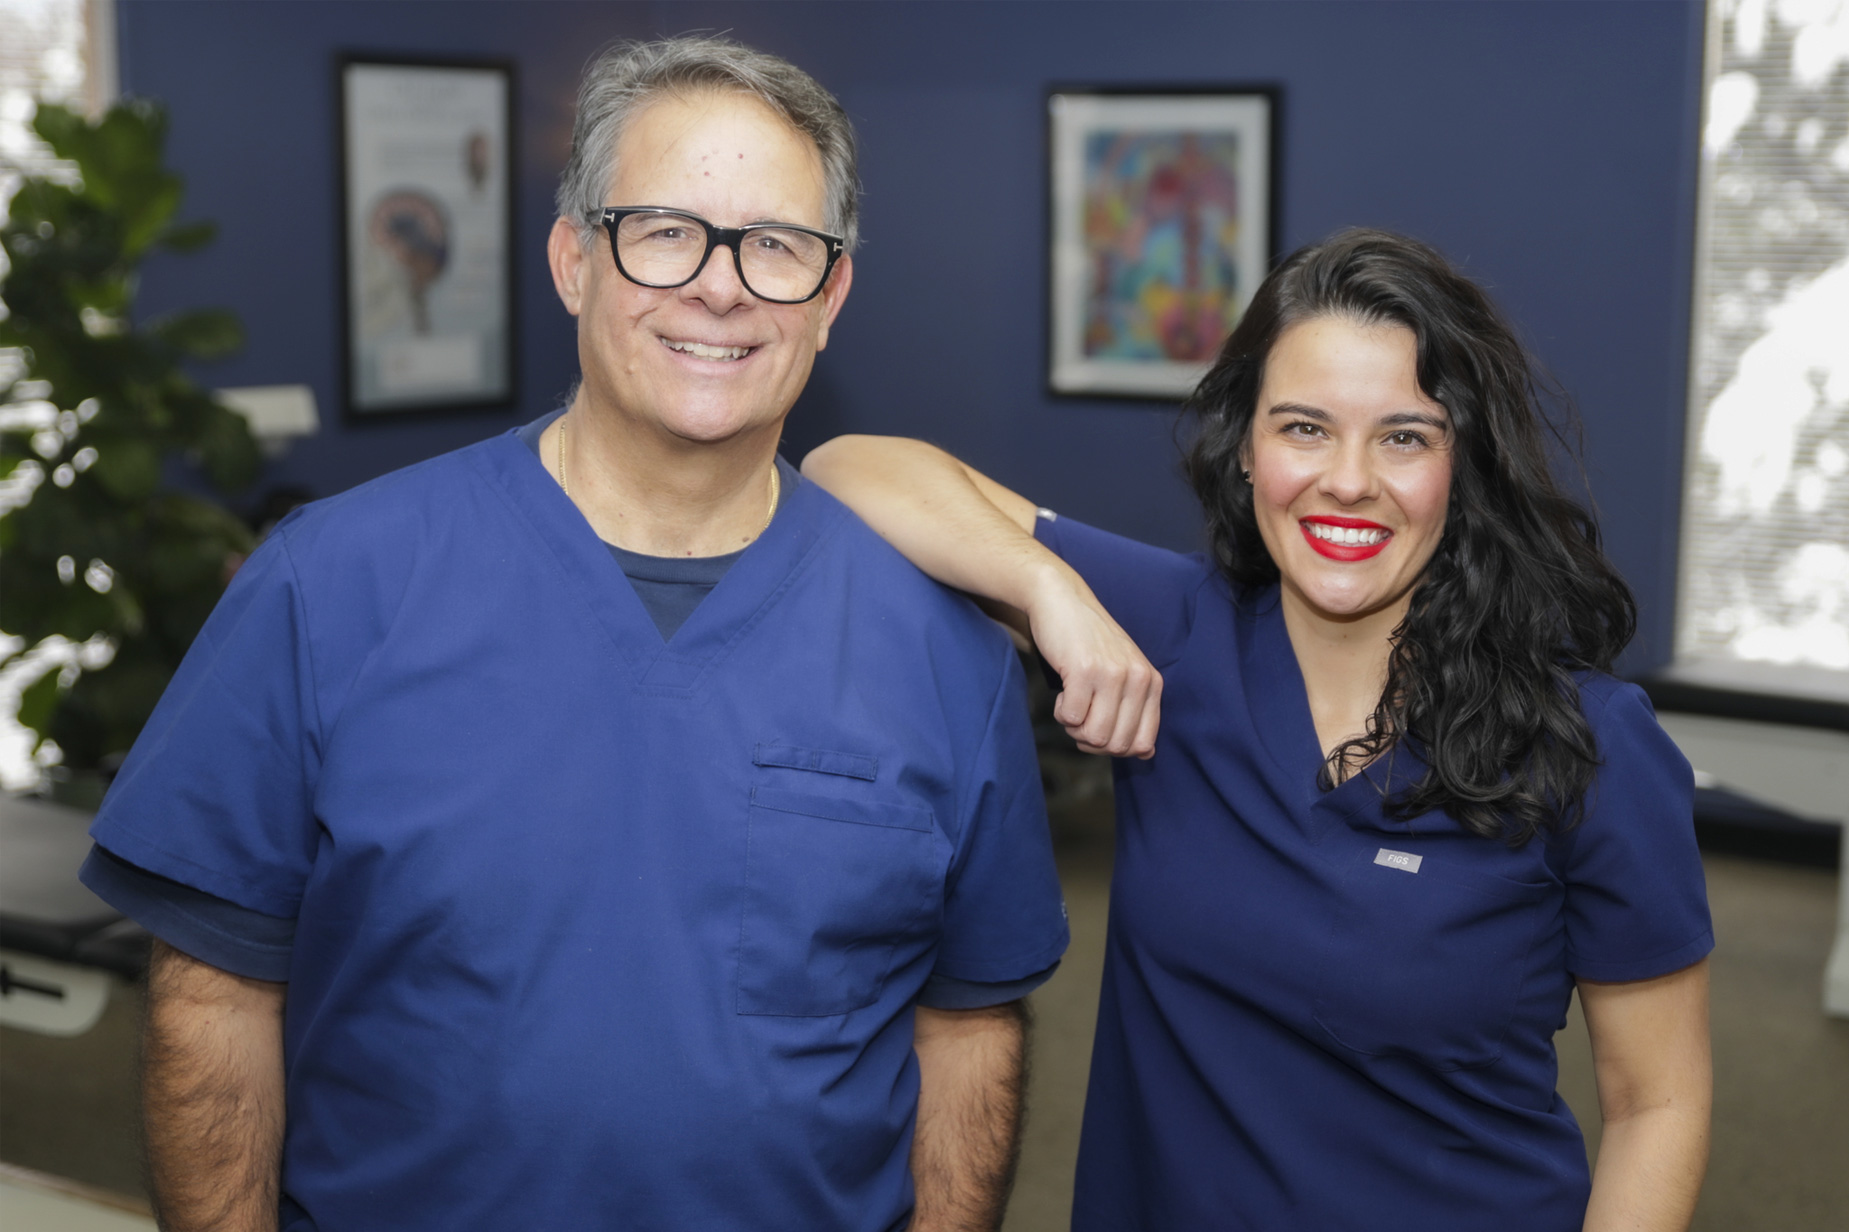 Dr. Arian and Rick DiGregorio photo